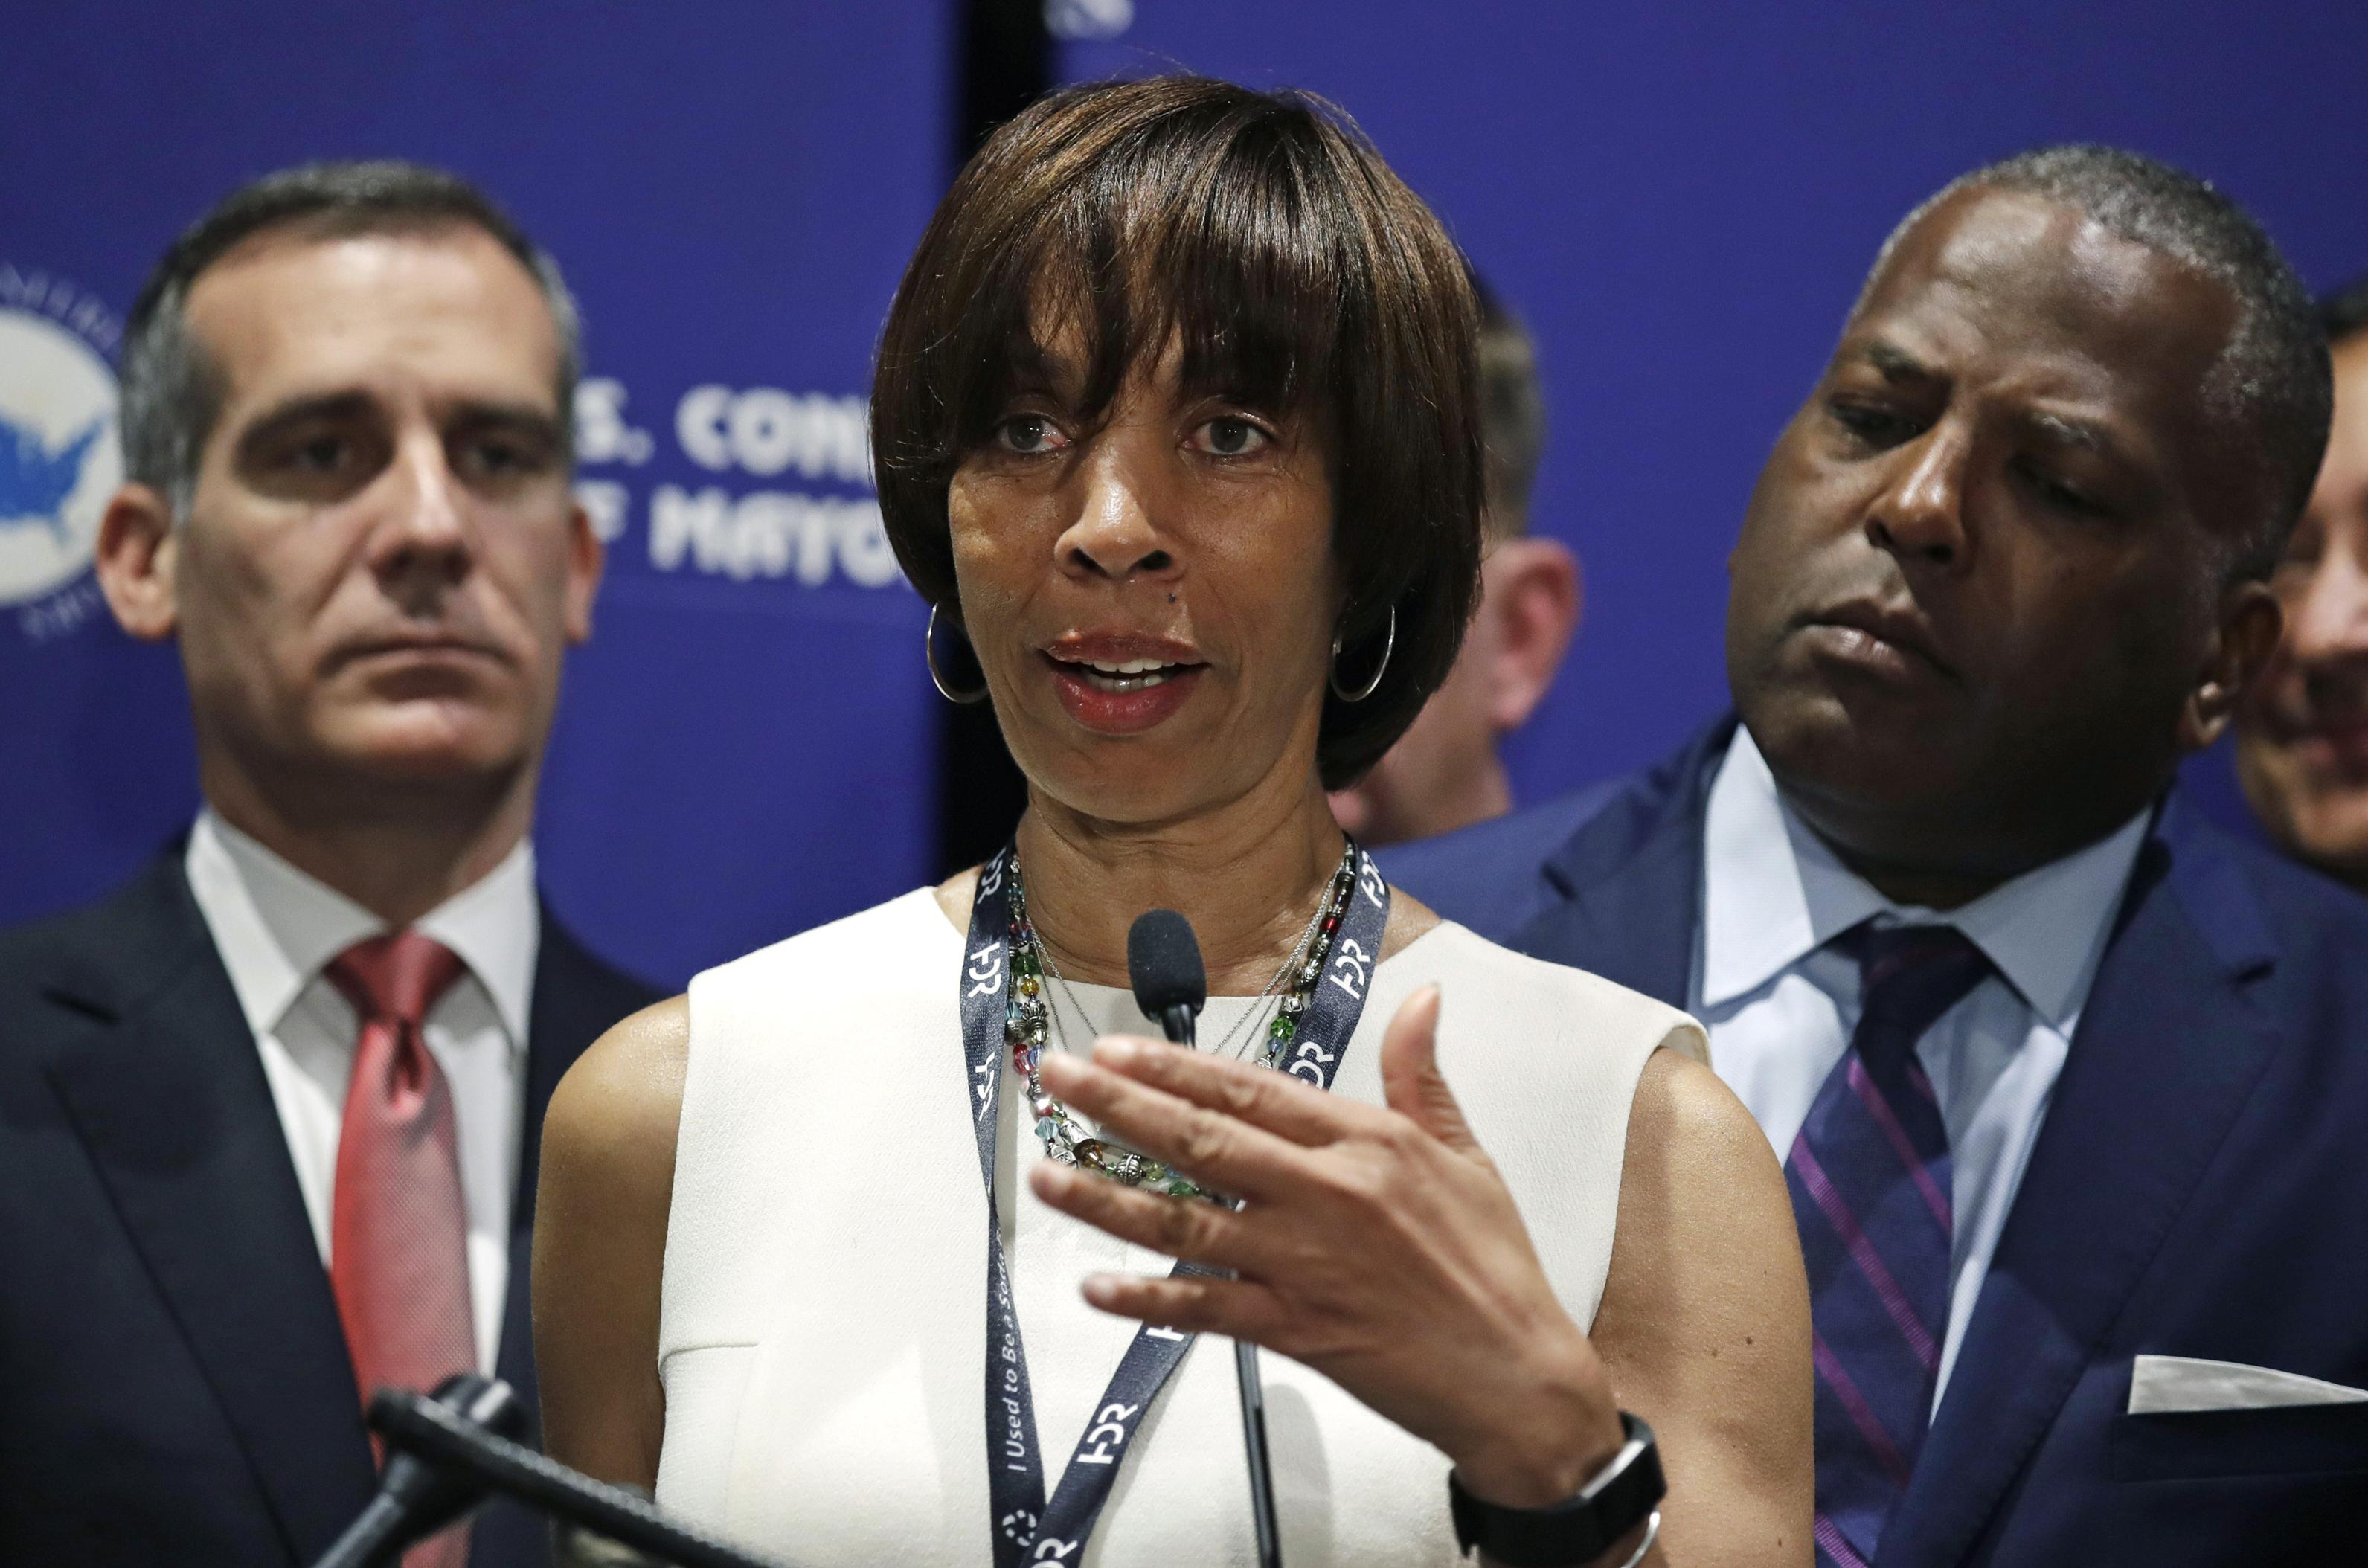 Baltimore Mayor Catherine Pugh resigns amid intensifying scandal and